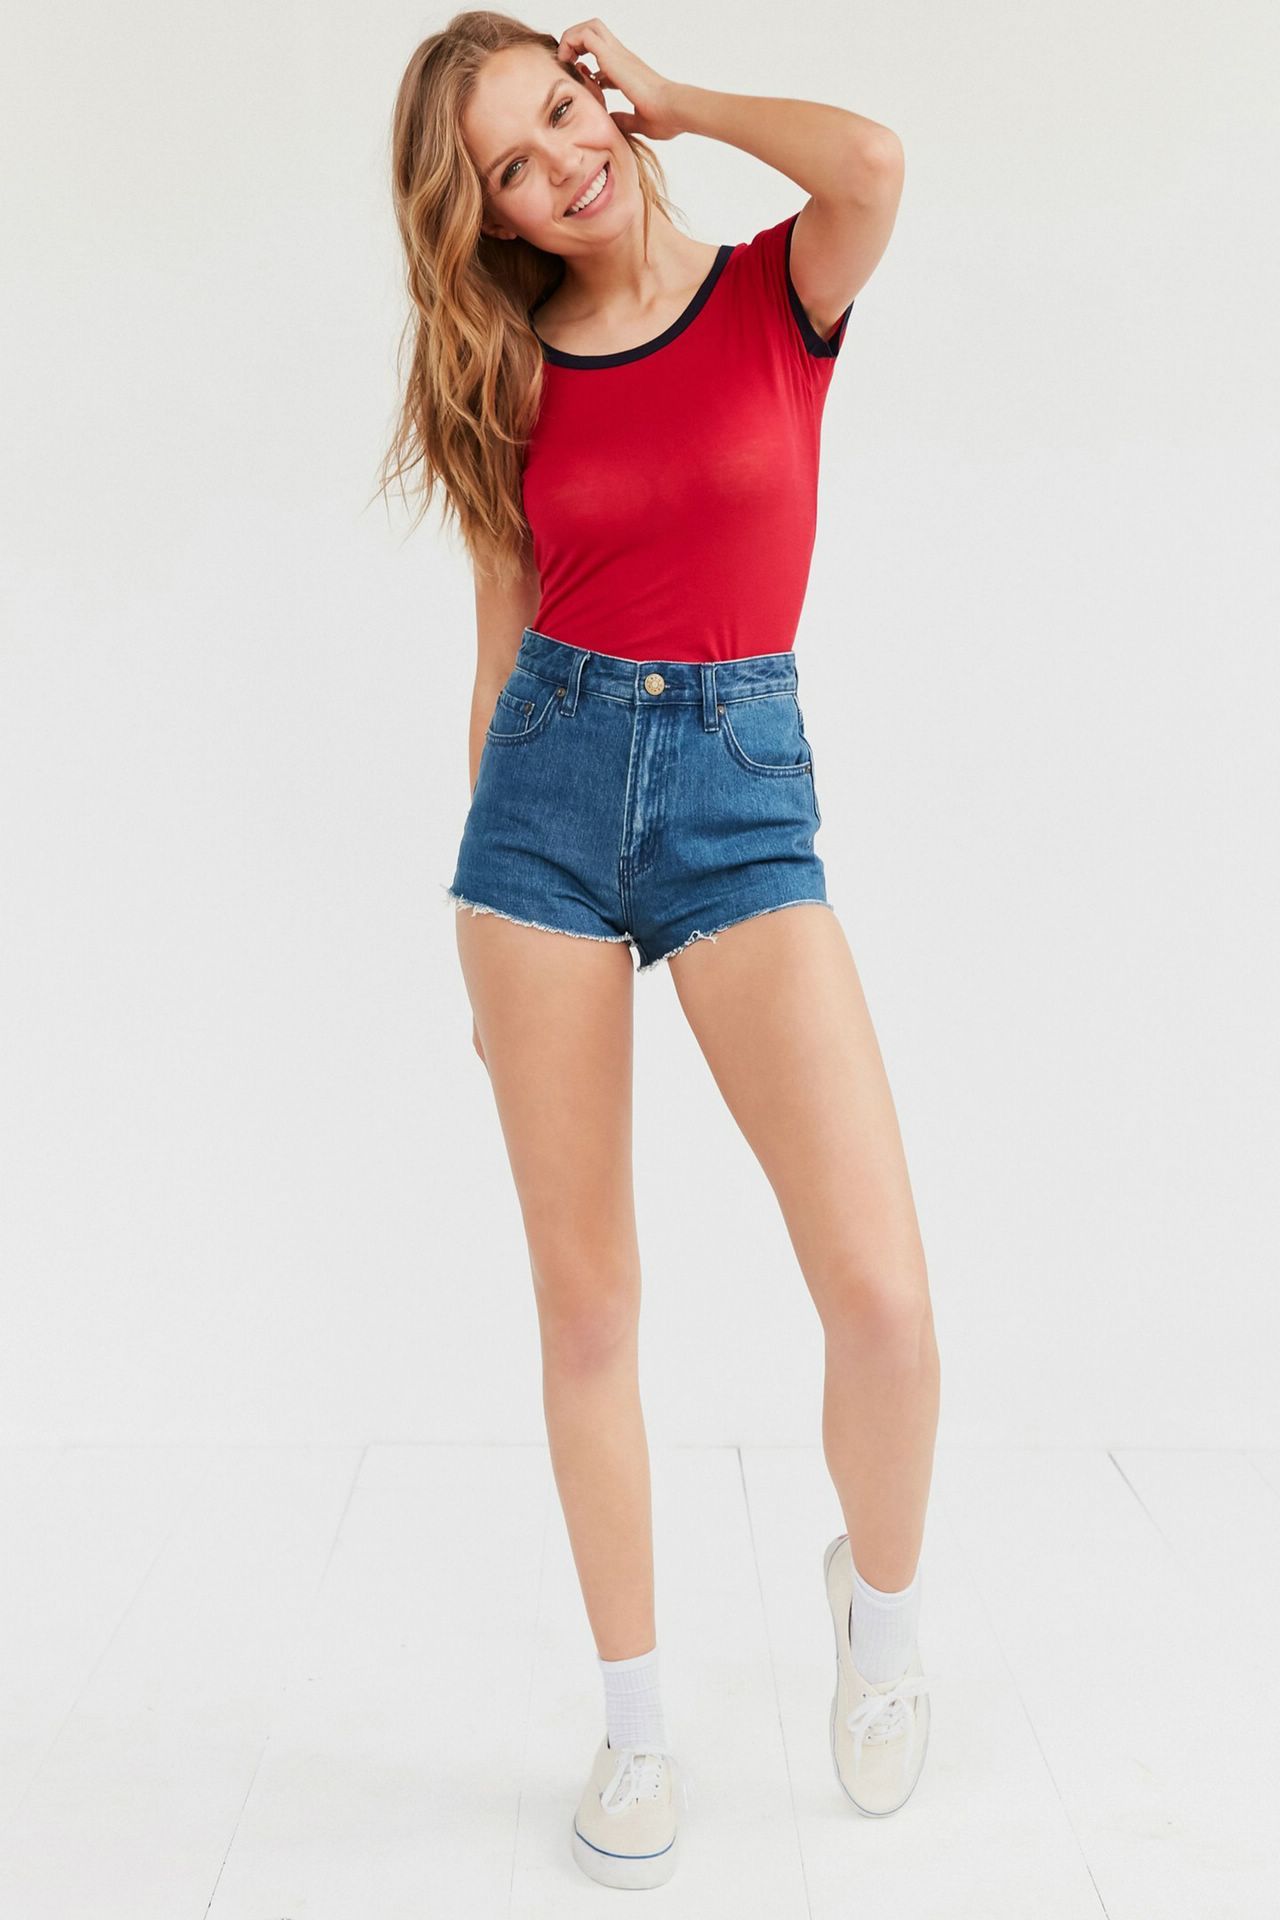 Josephine Skriver in denim shorts and red top for Urban Outfitters ...